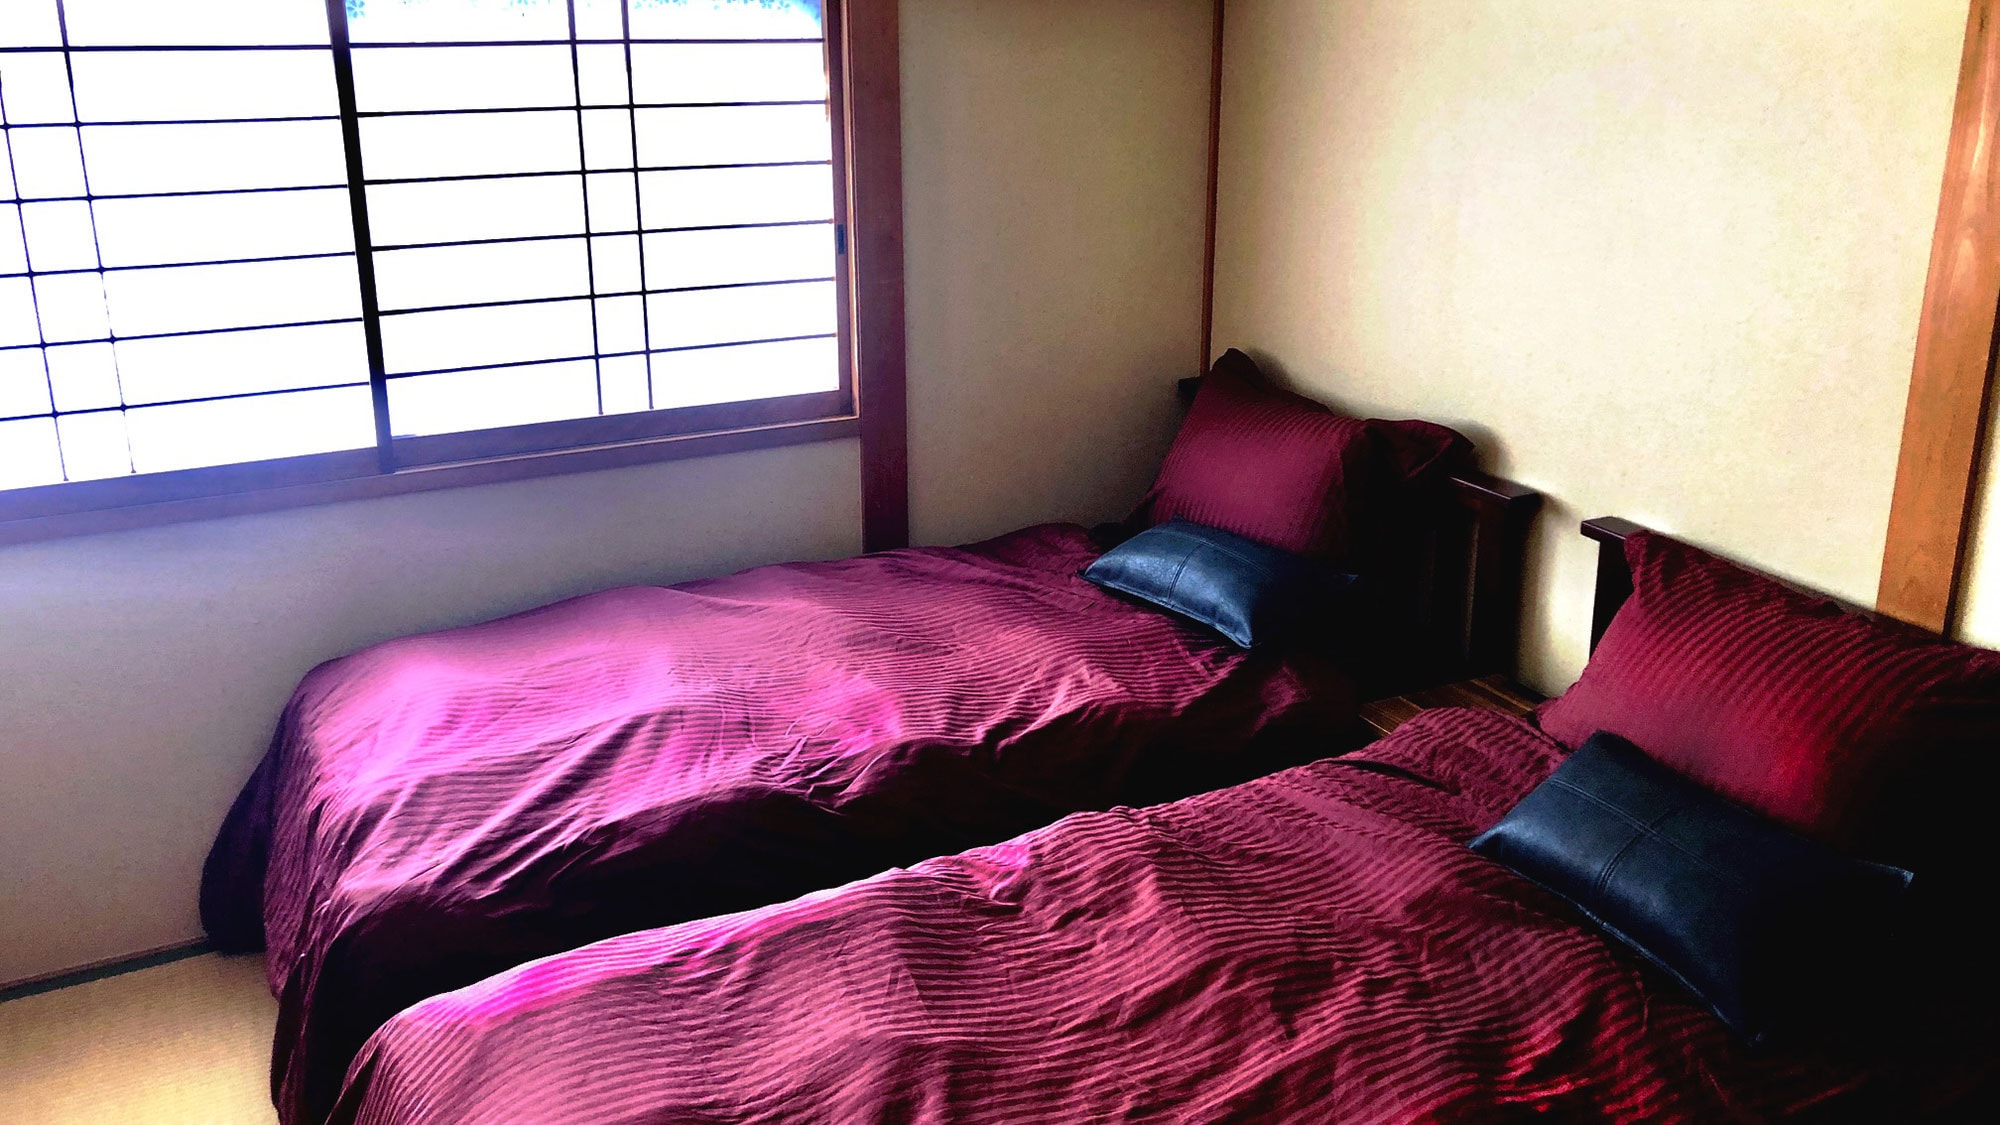 ・ Pure Japanese style room: 2 single beds installed